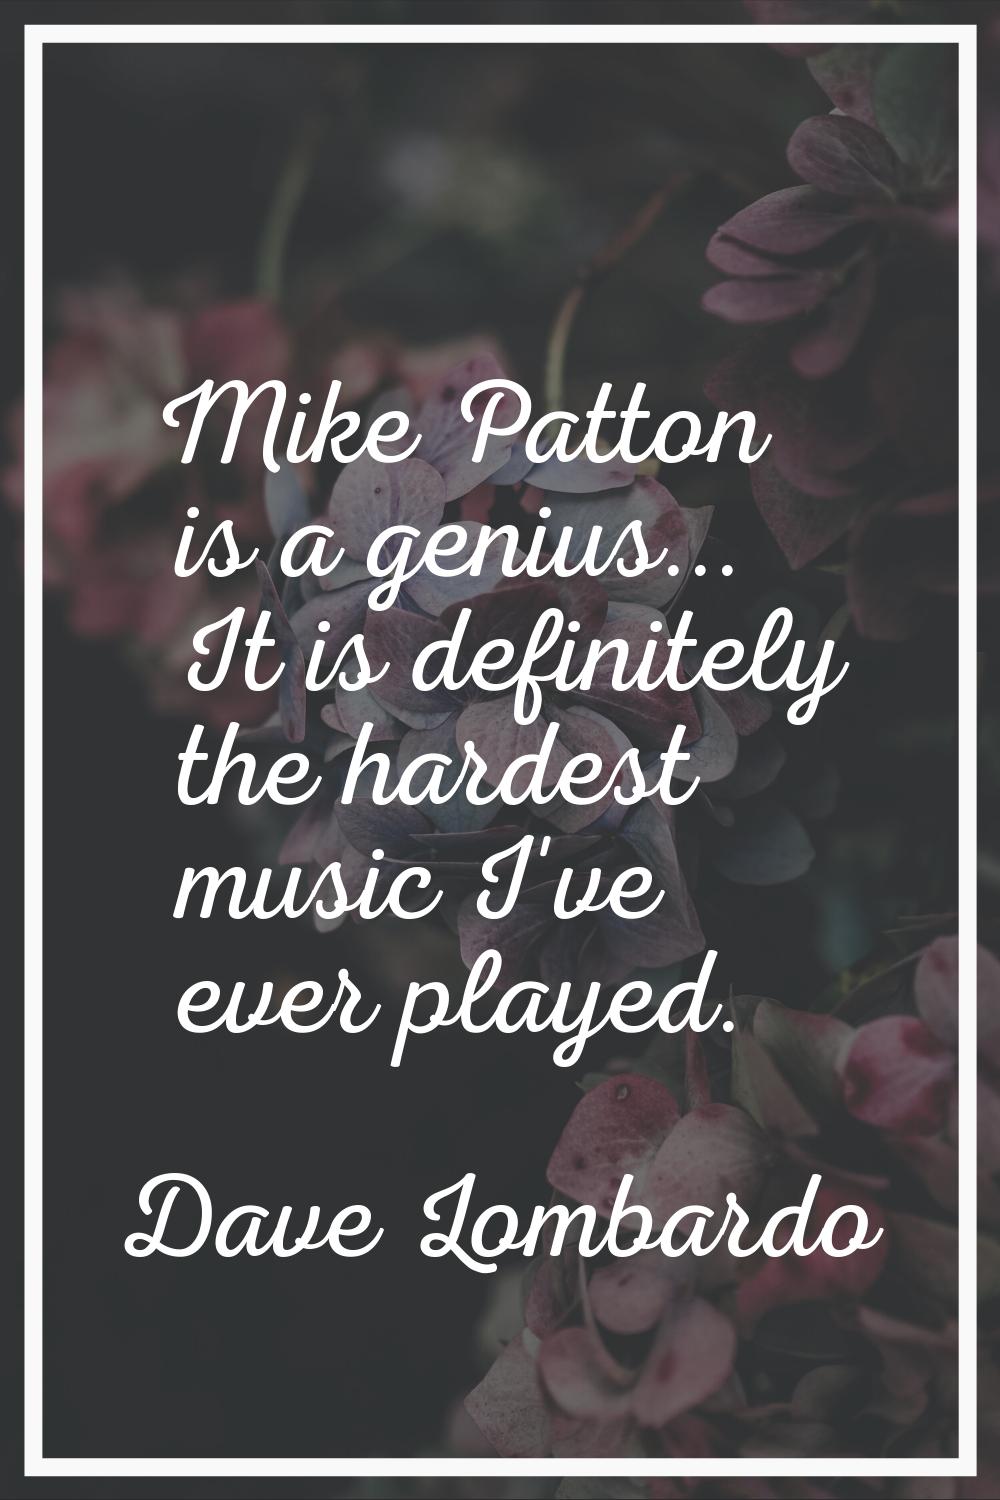 Mike Patton is a genius... It is definitely the hardest music I've ever played.